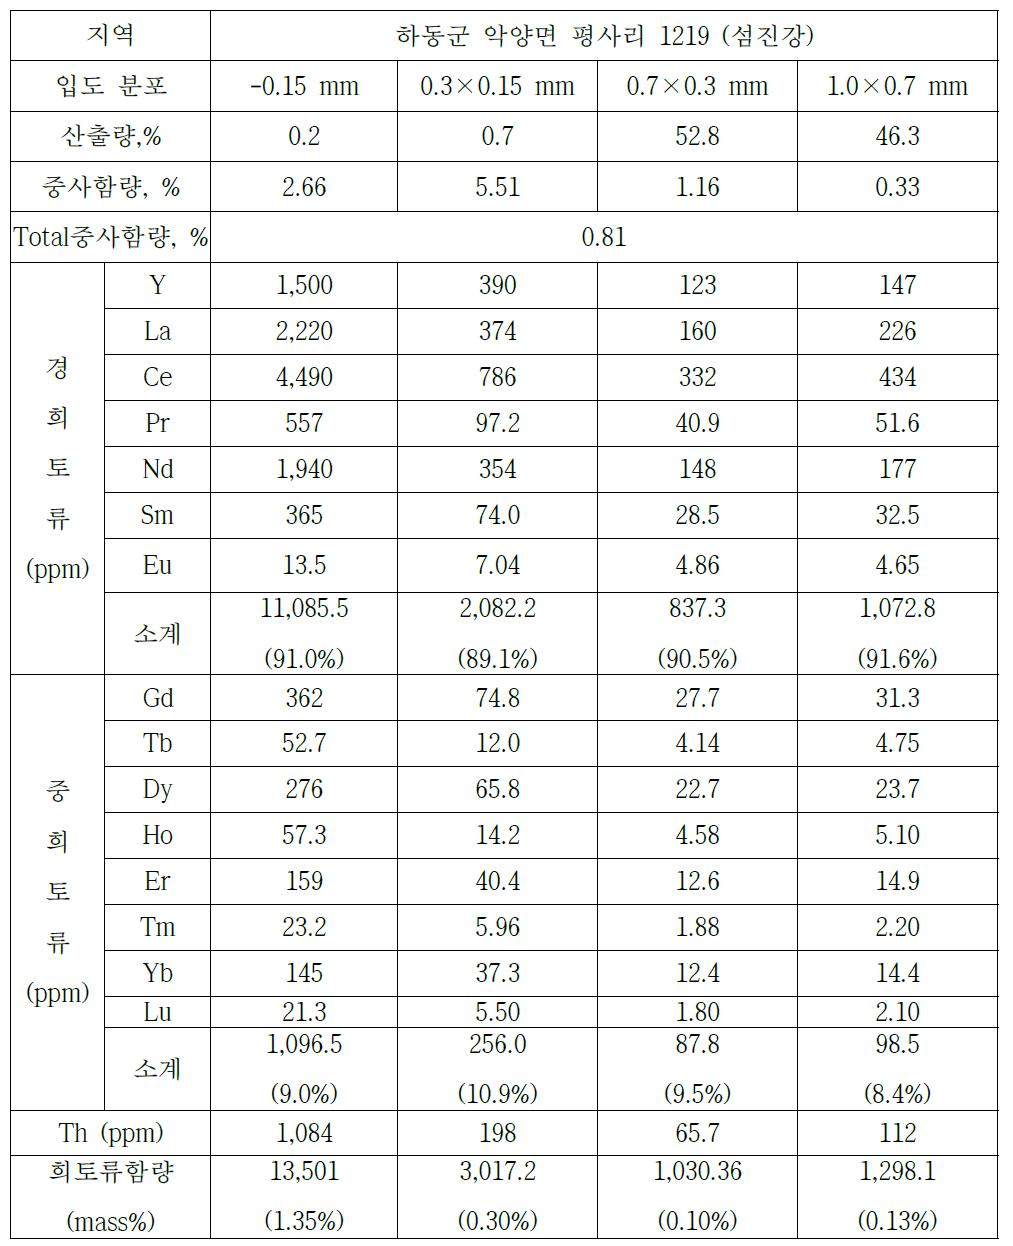 Rare earth element (REE) contents in heavy mineral sand collected from Seomjin River (2)